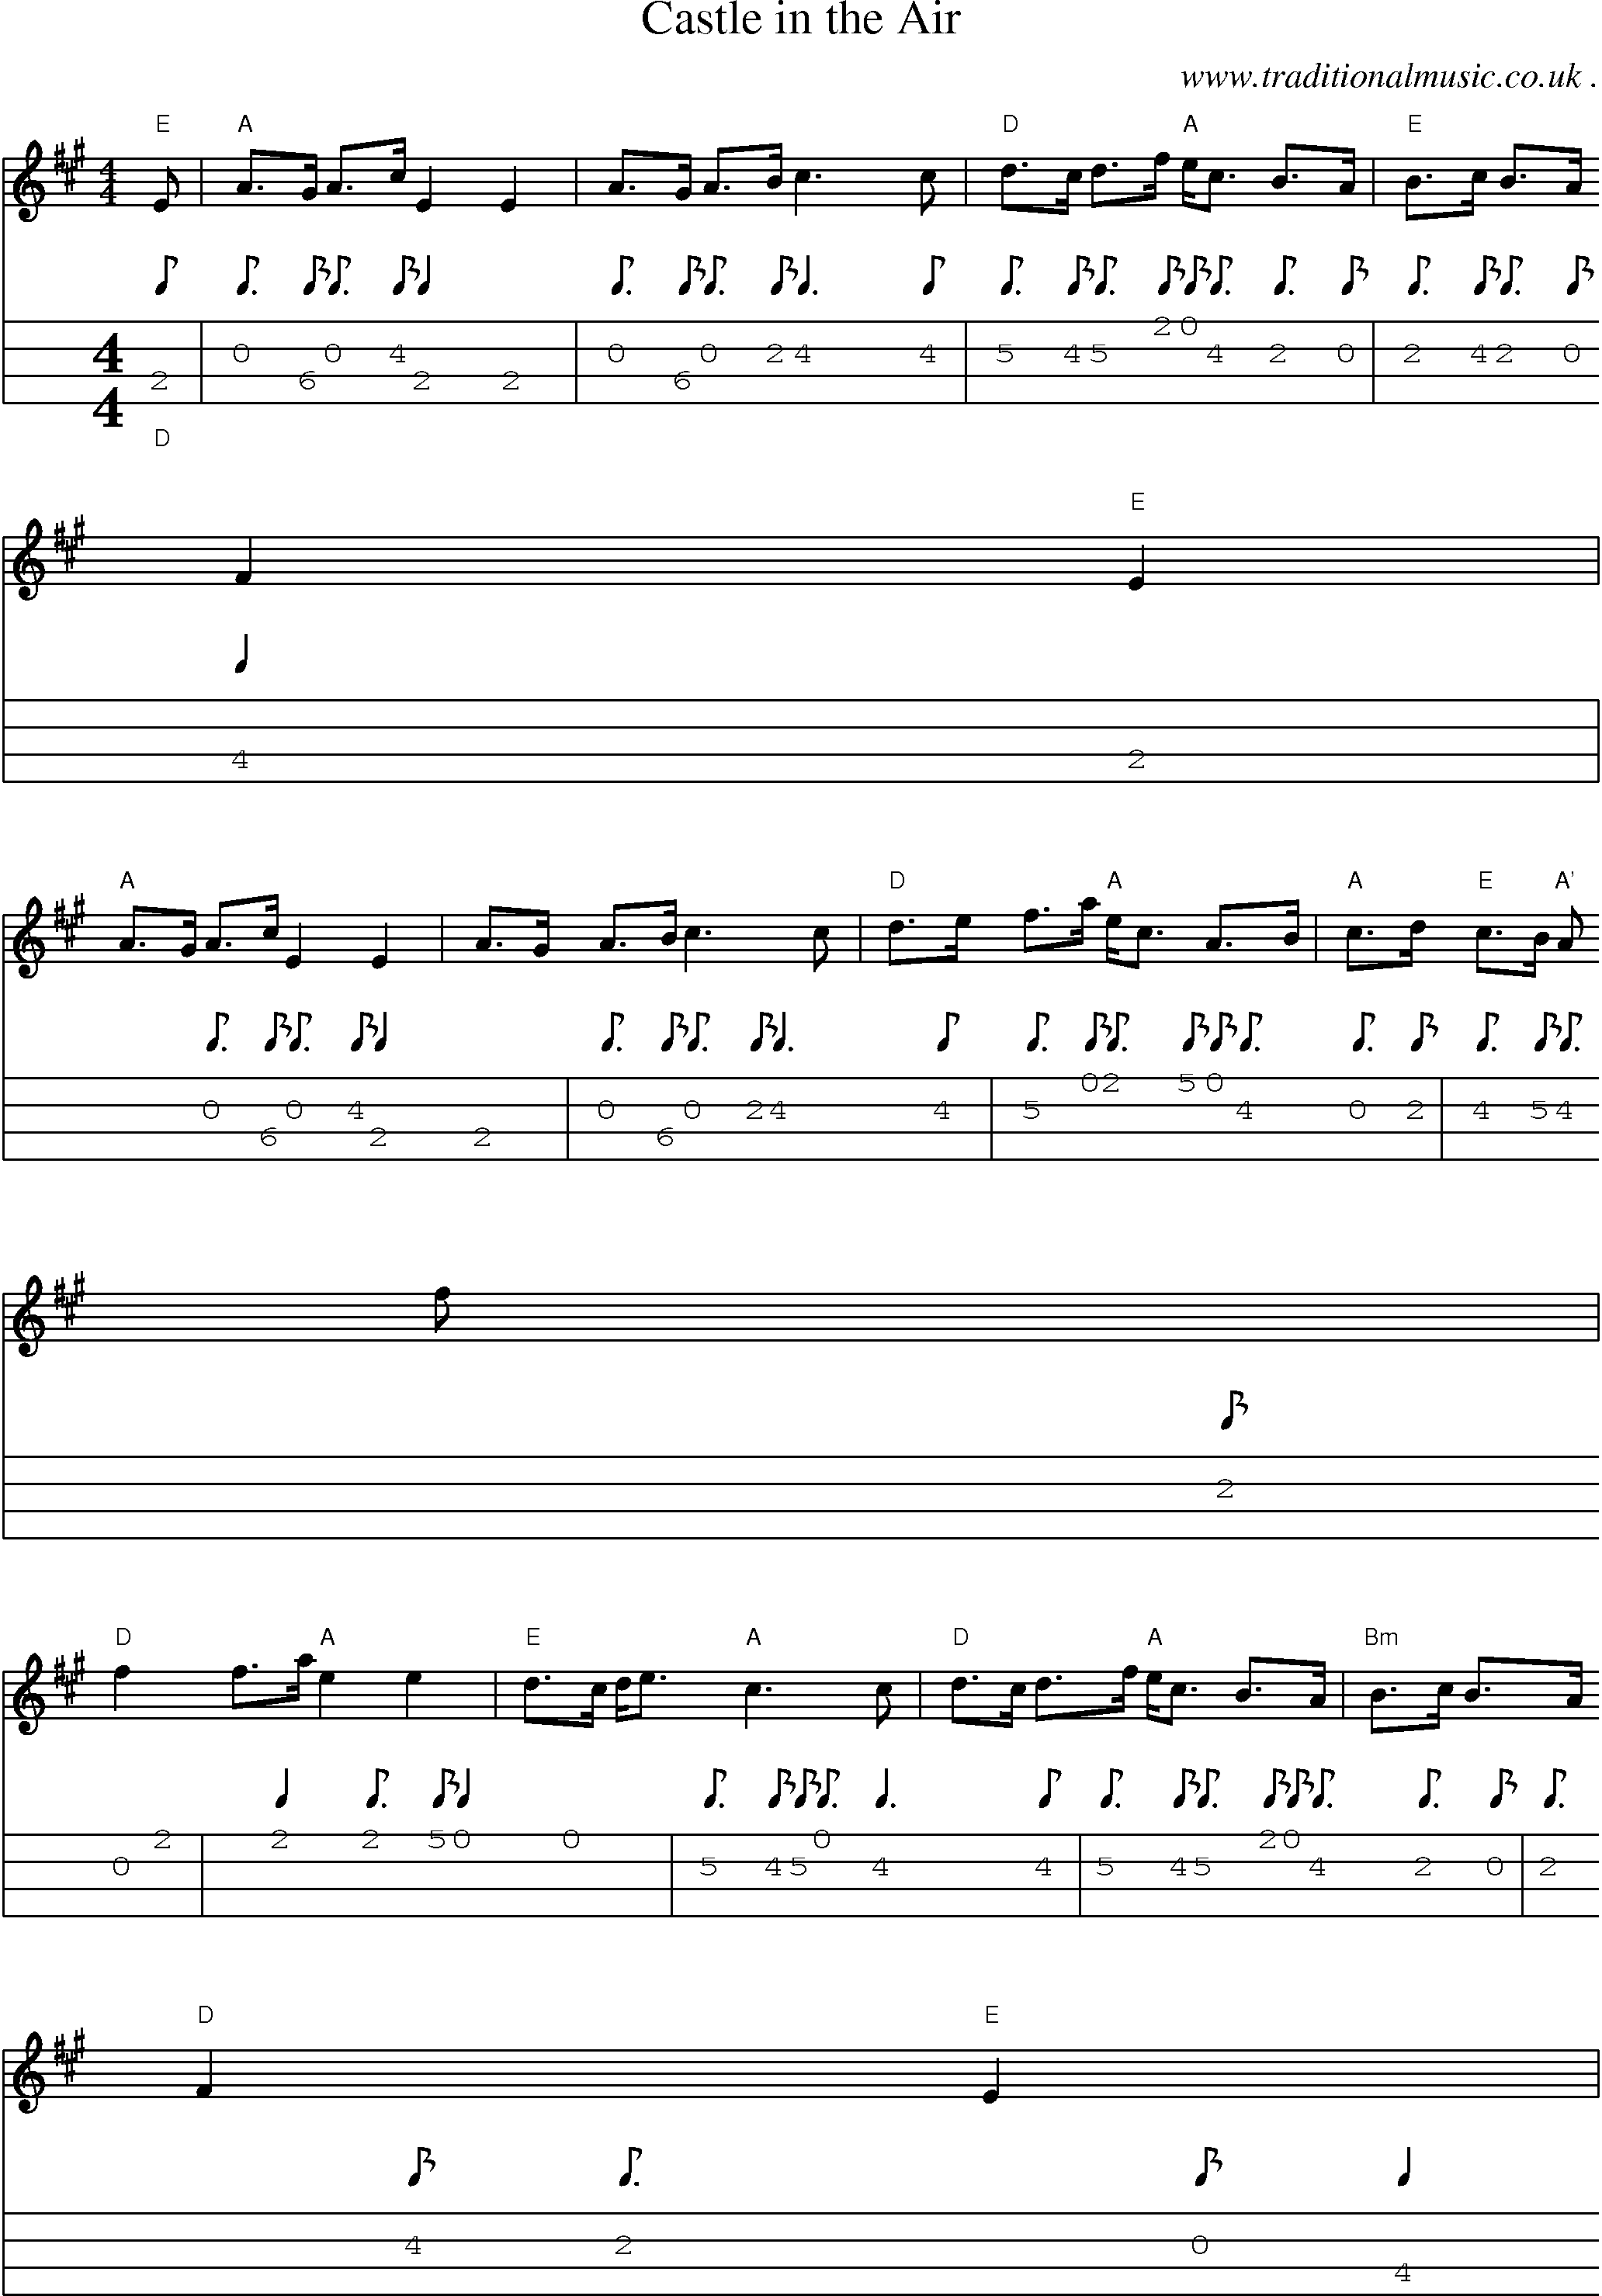 Sheet-music  score, Chords and Mandolin Tabs for Castle In The Air